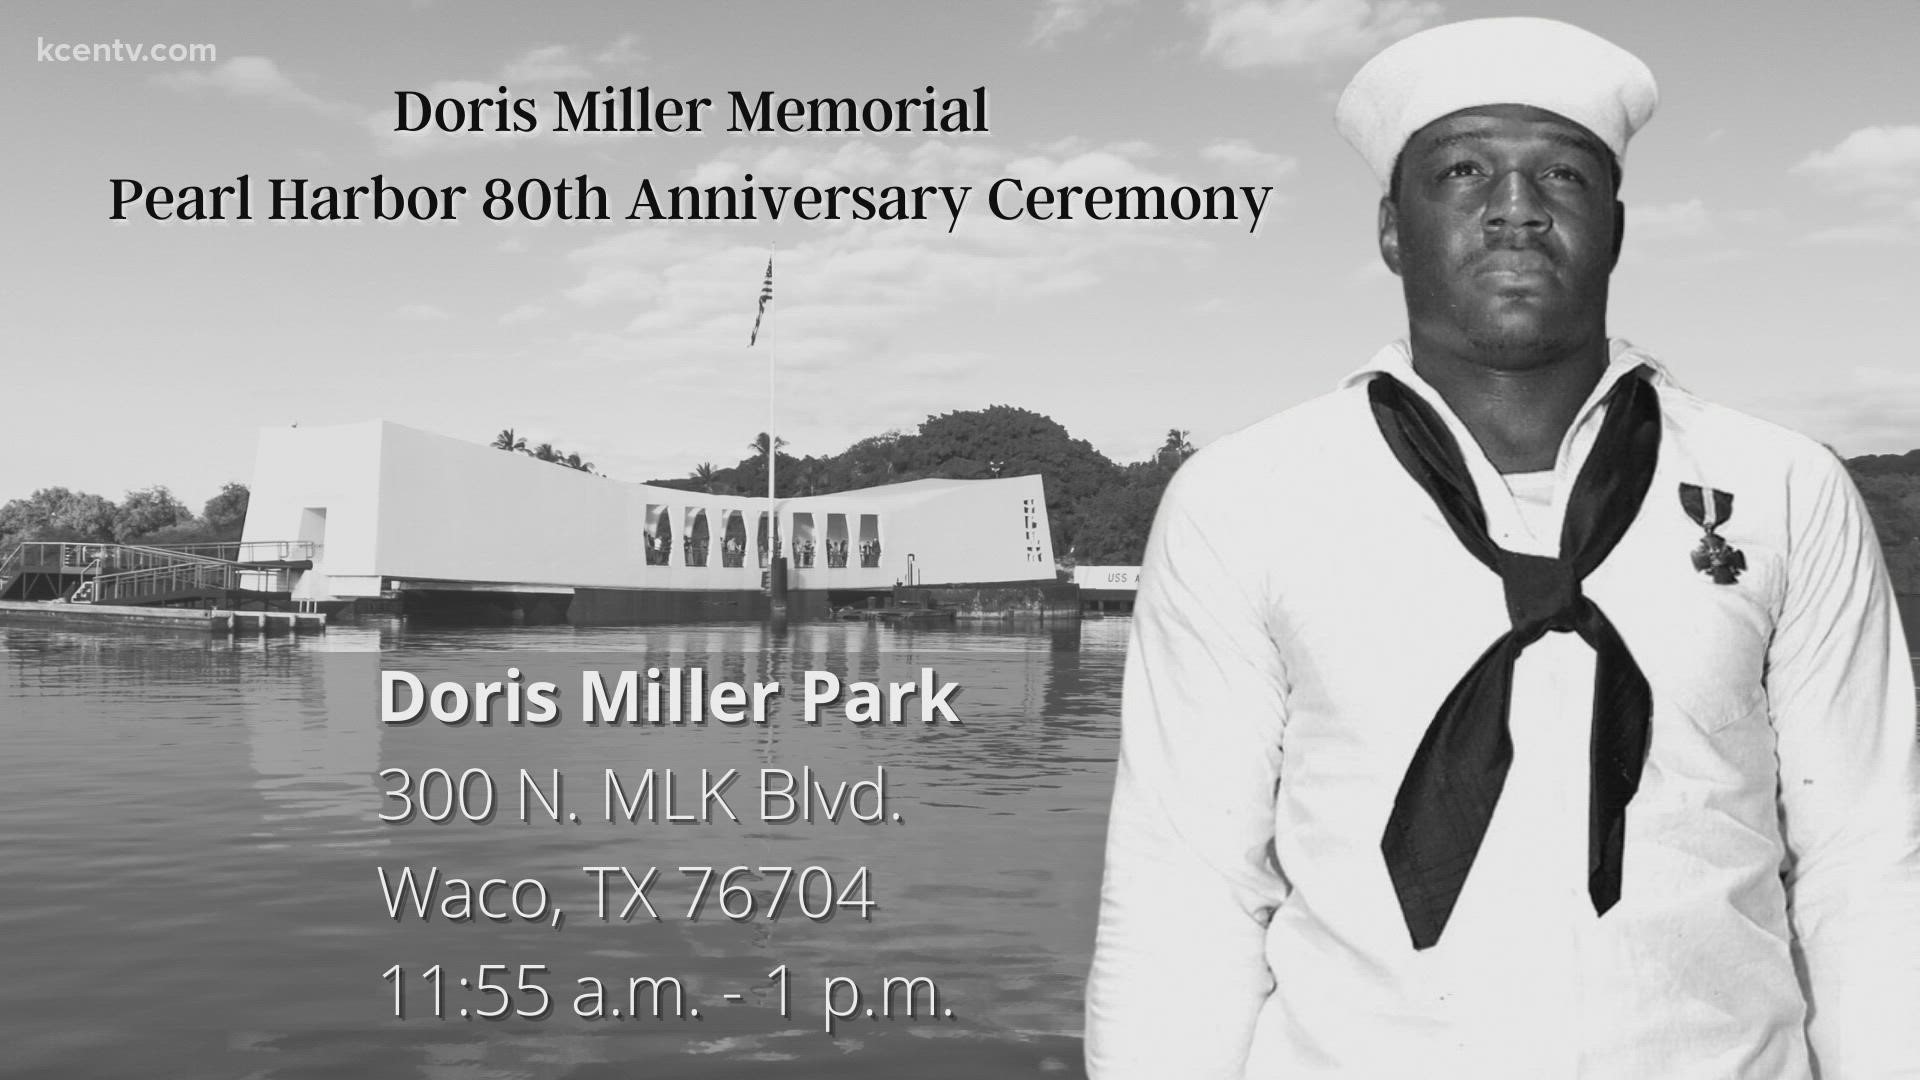 Waco will be holding its own anniversary ceremony at Dorris Miller Park. KCEN's Bary Roy with more.